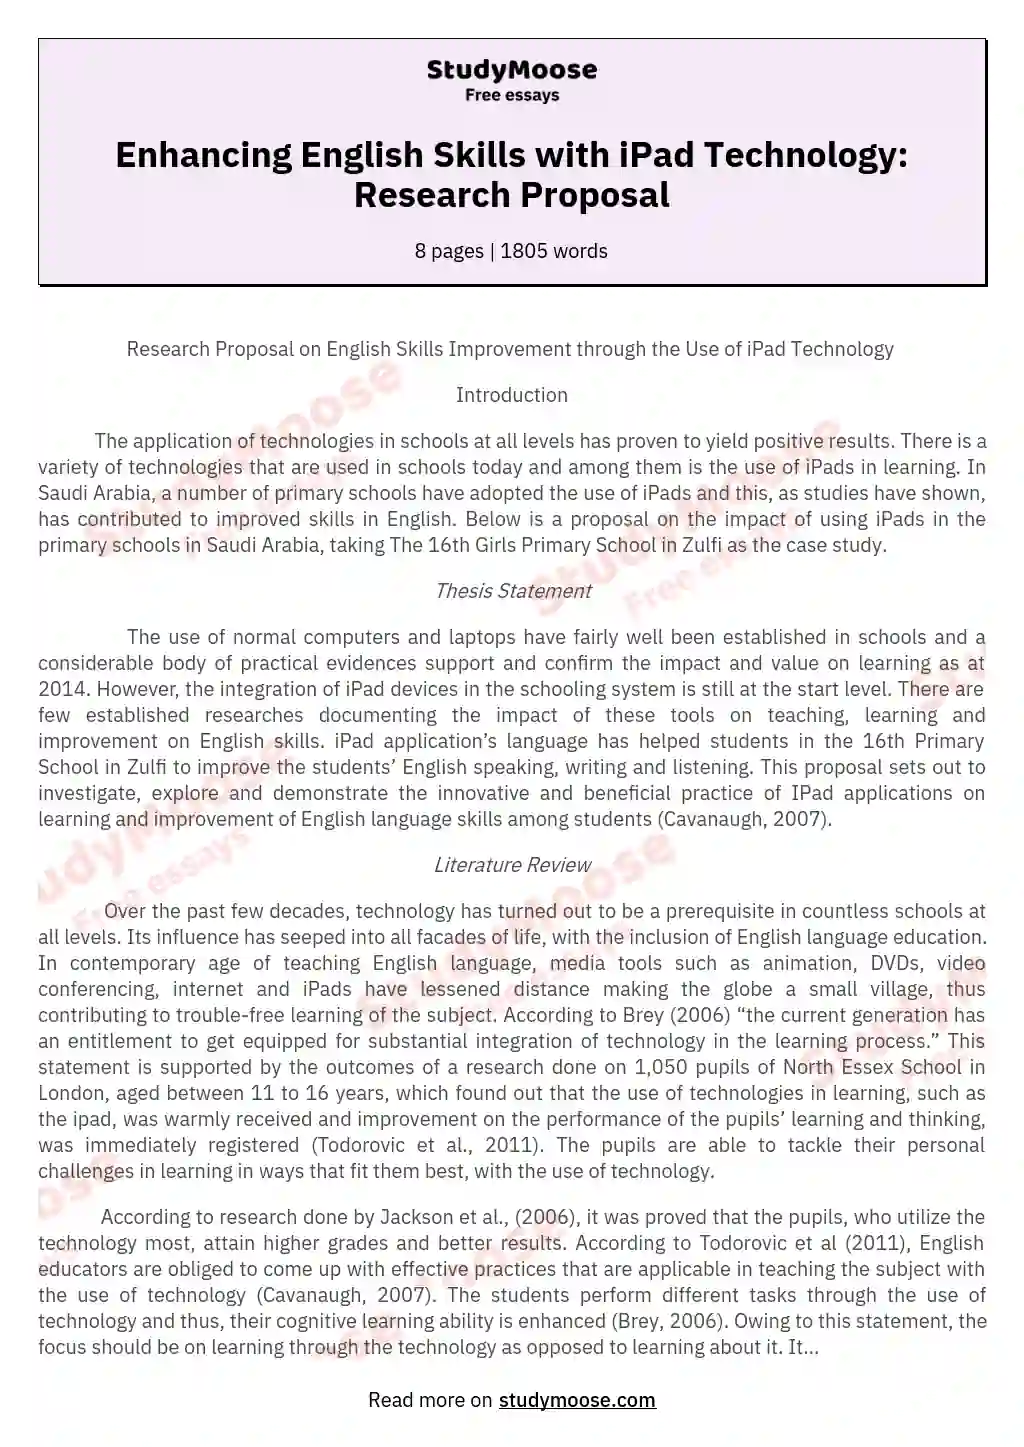 Enhancing English Skills with iPad Technology: Research Proposal essay